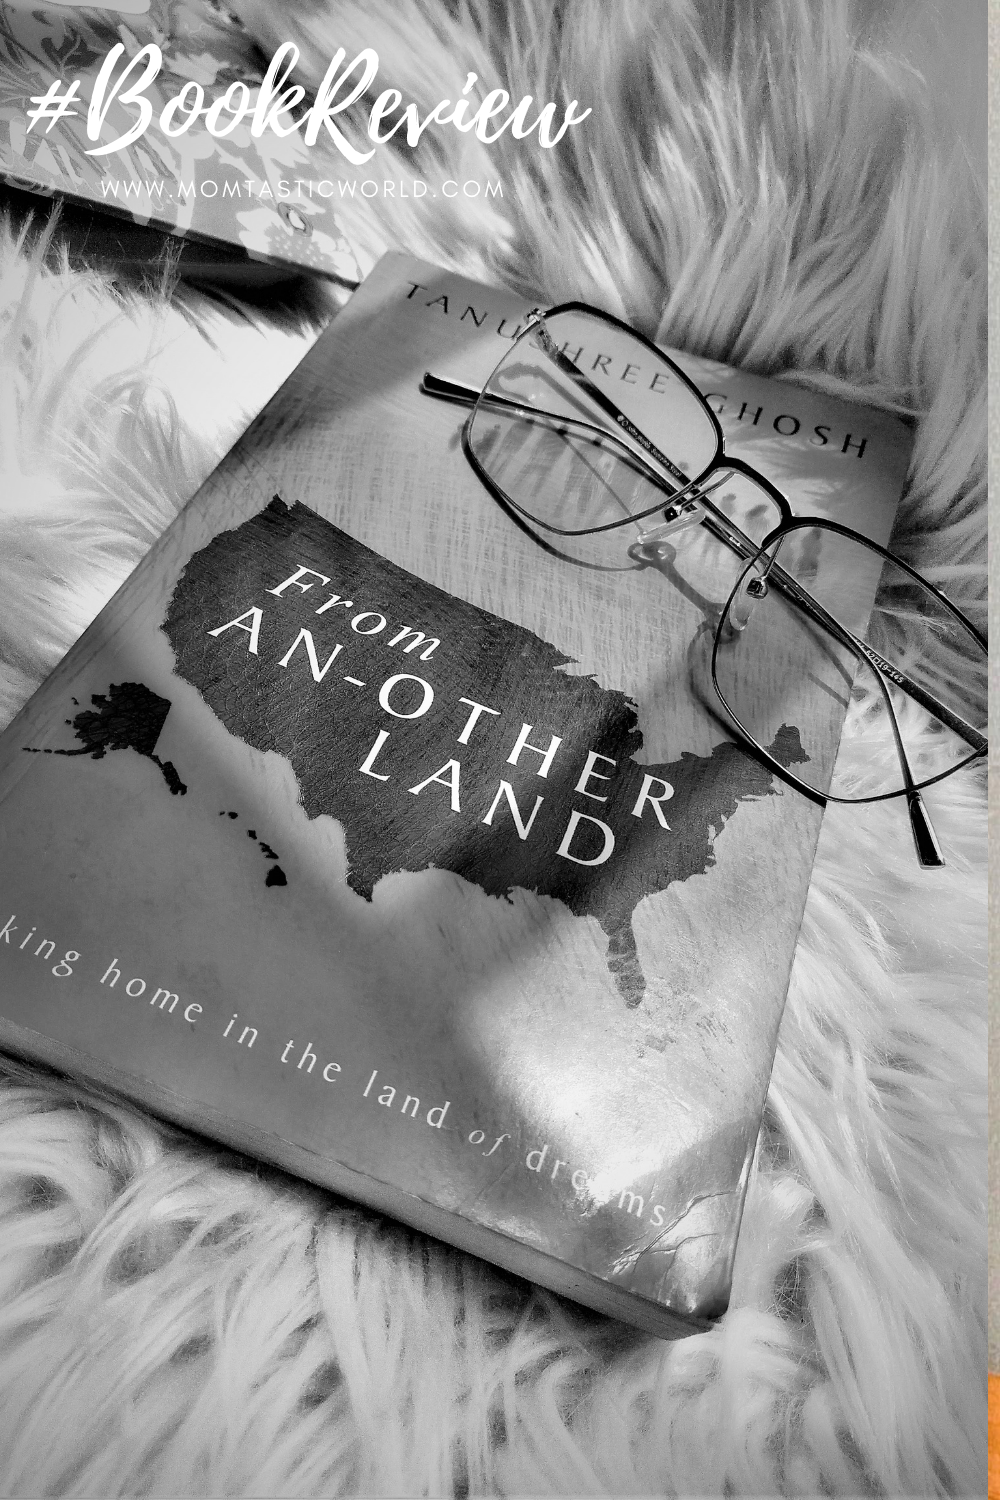 From An-Other Land By Tanushree Ghosh (Short stories) – #BookReview